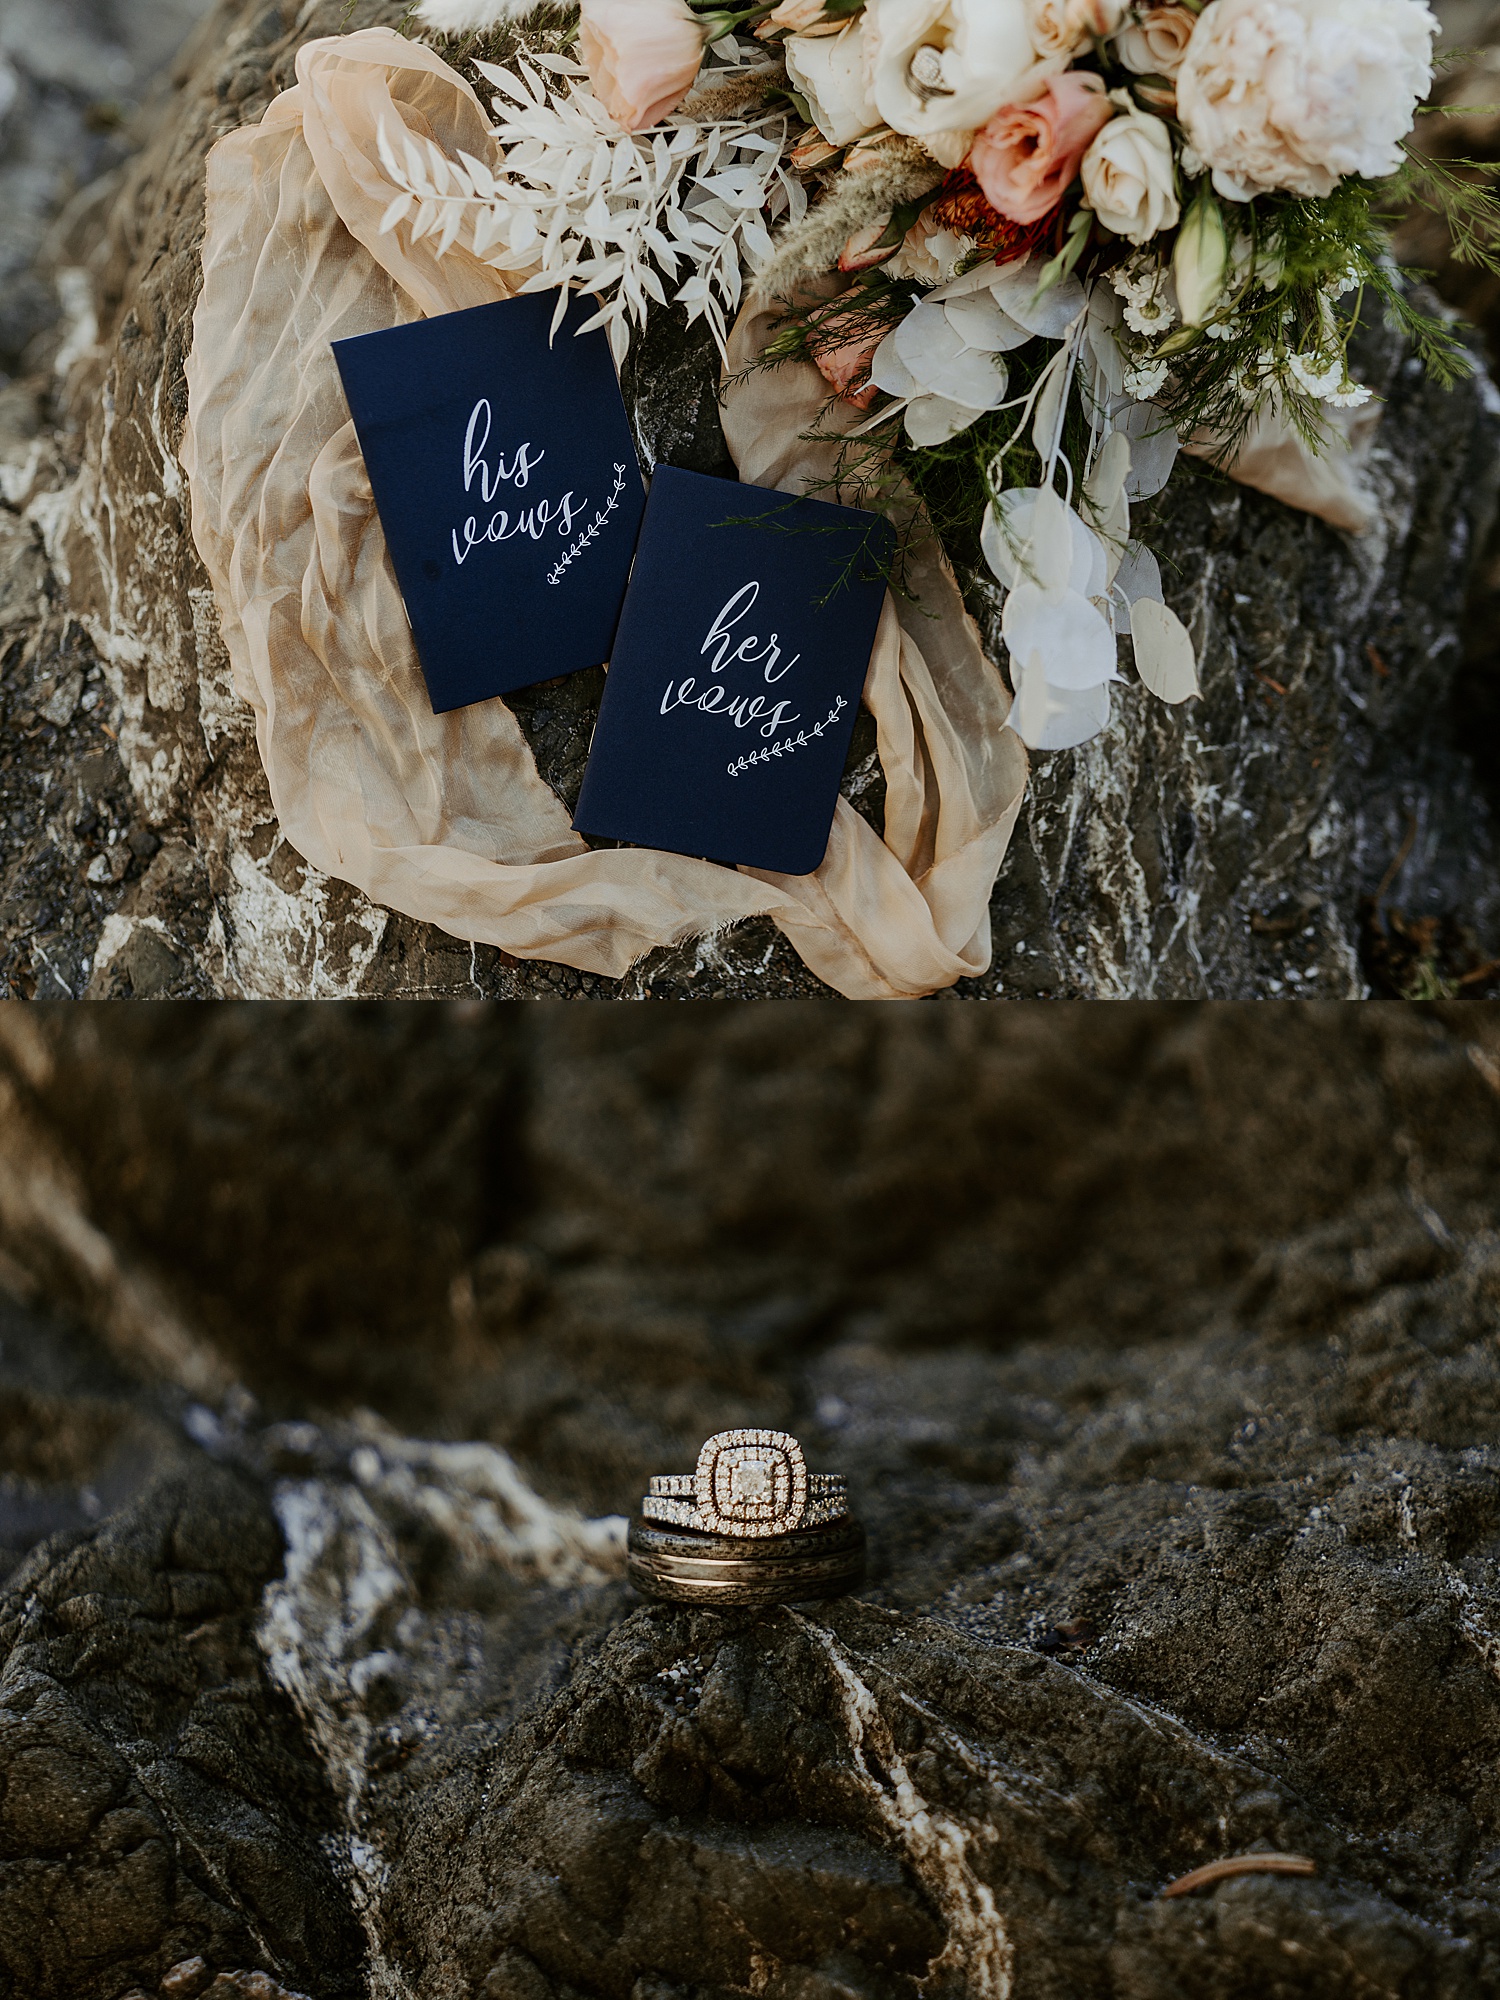 Wedding rings and vow books